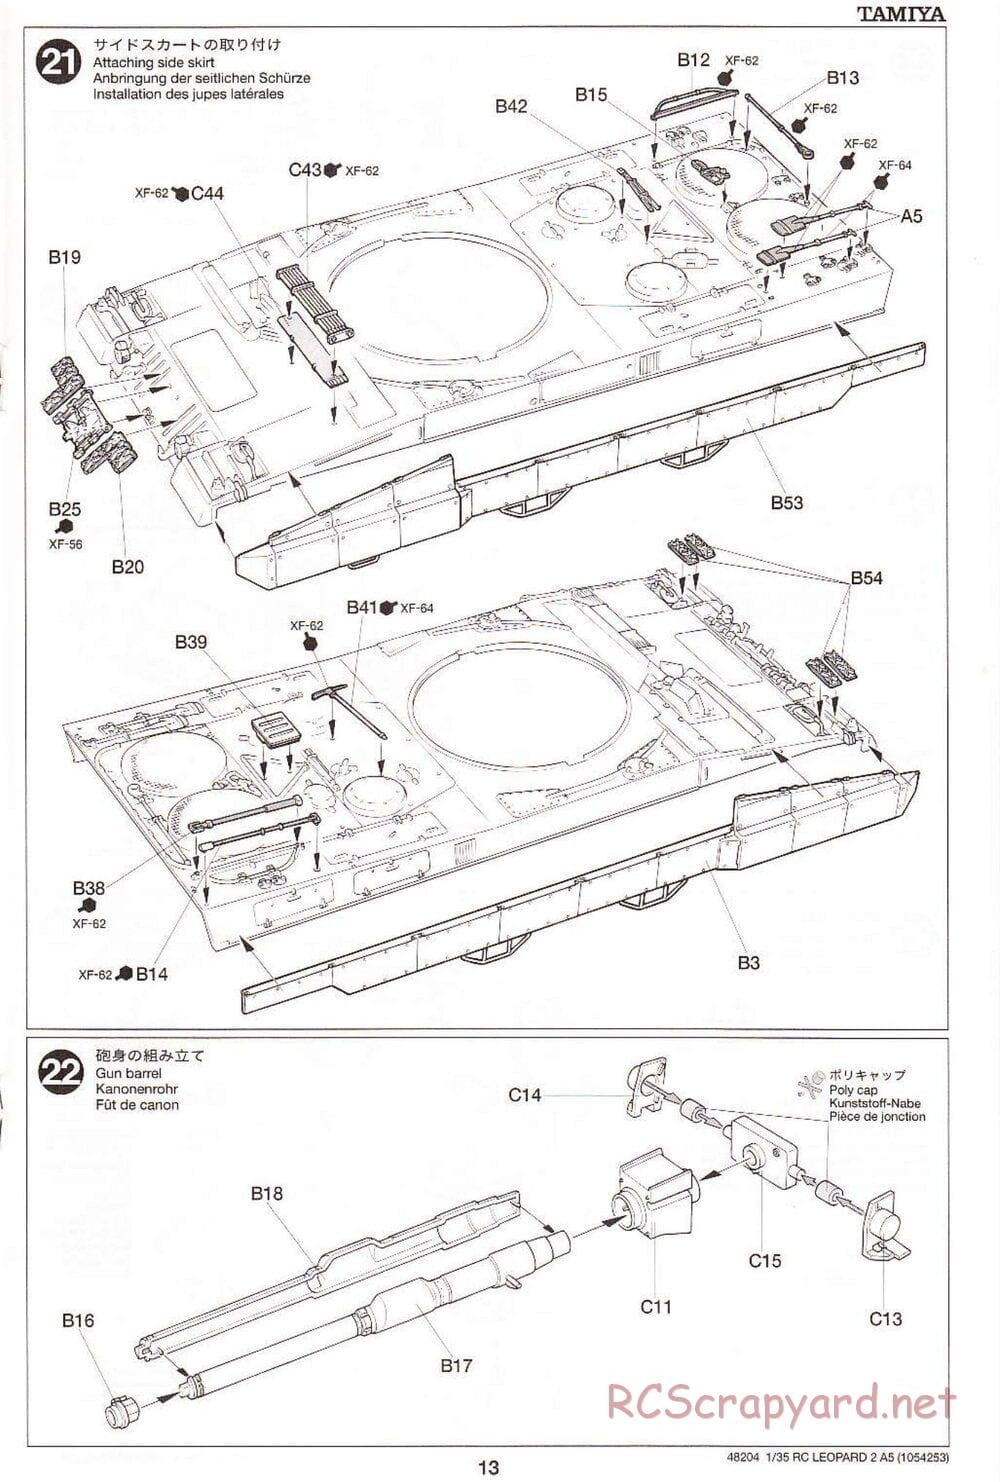 Tamiya - Leopard 2 A5 Main Battle Tank - 1/35 Scale Chassis - Manual - Page 13